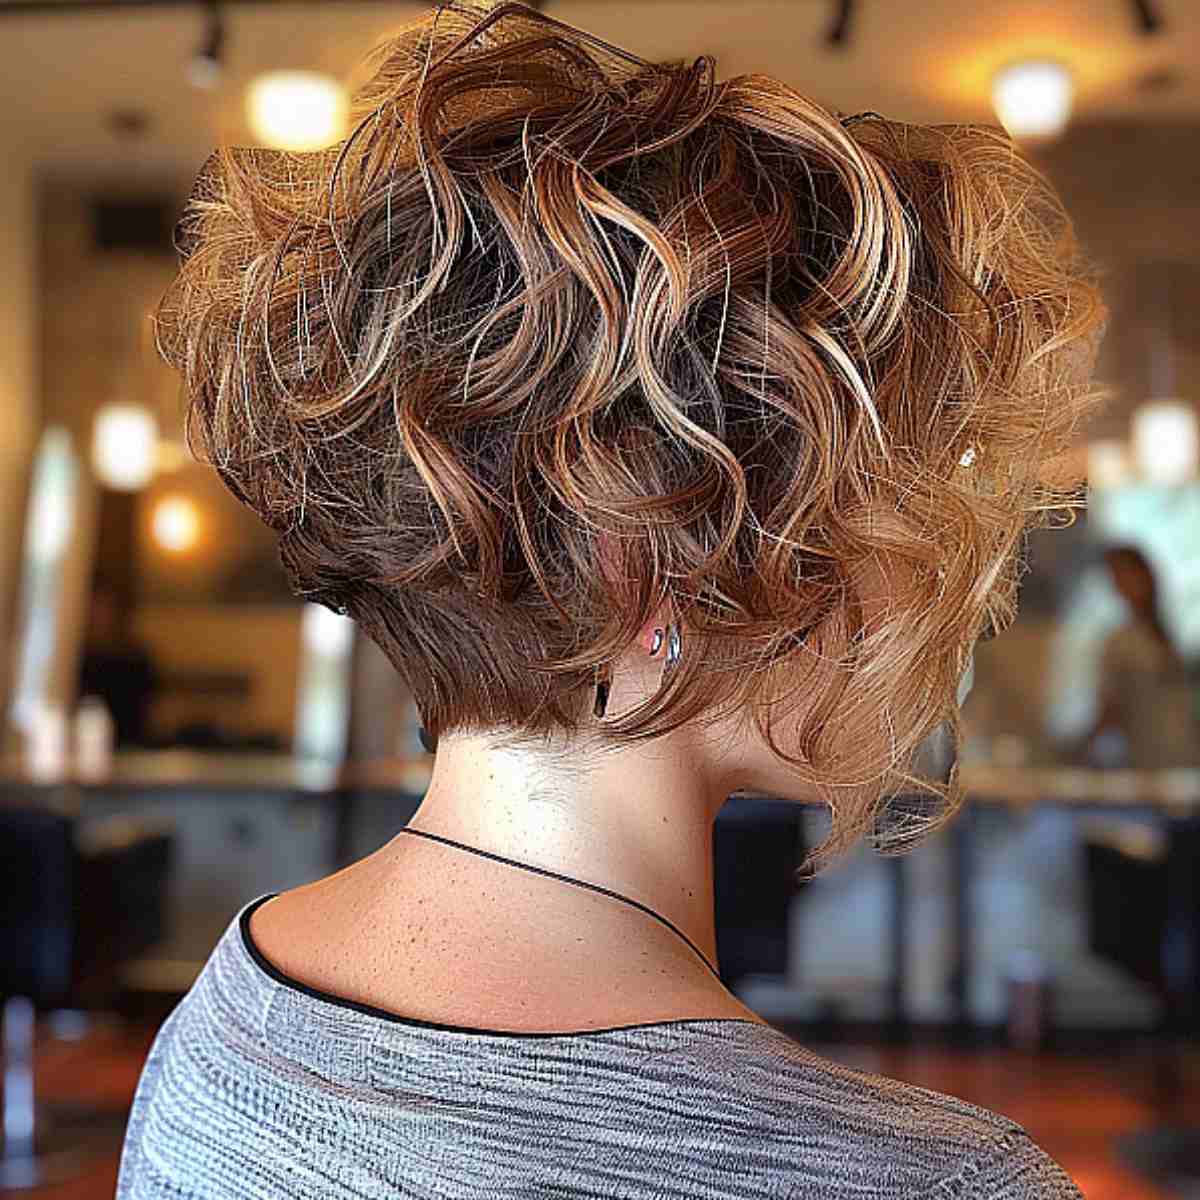 17 Stacked, Short Curly Bob Haircuts to Enhance Your Natural Curls